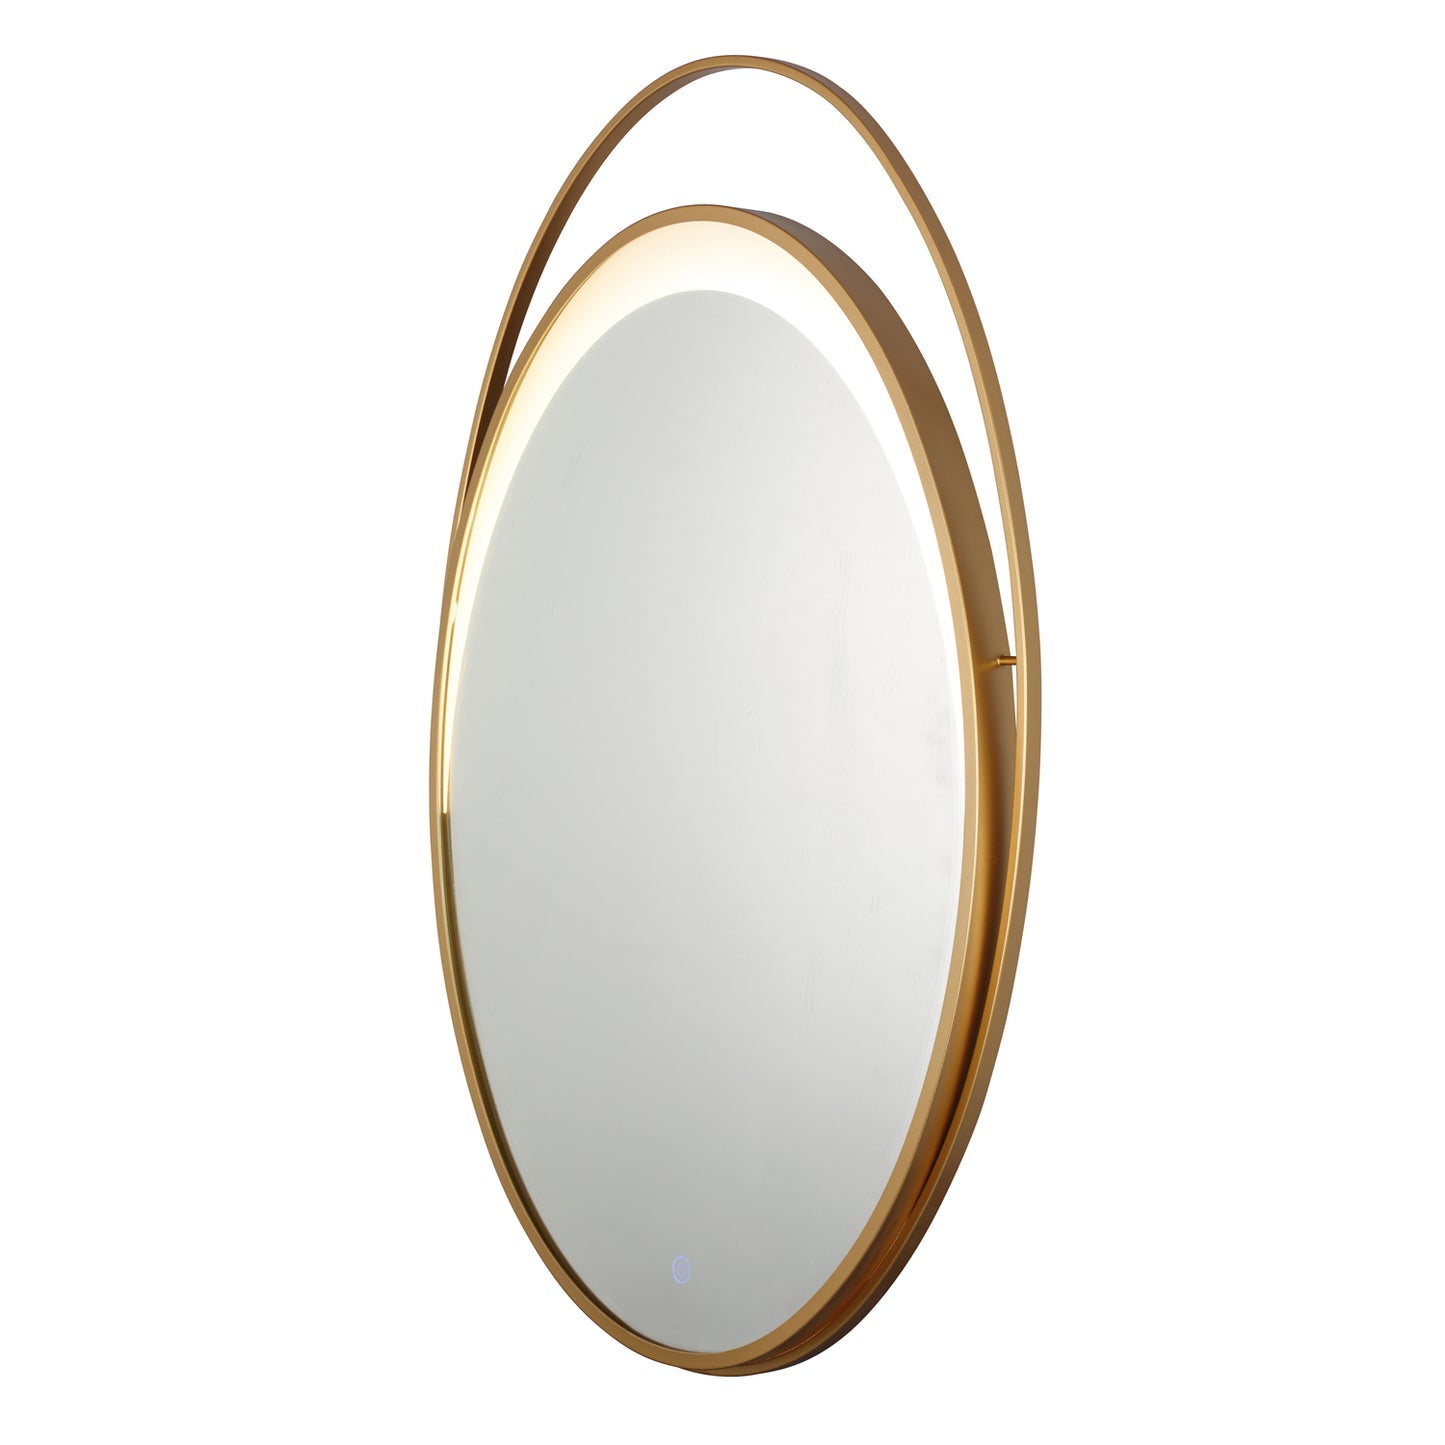 MacLuu Oval Vanity Mirror with Lights Double Eggshell-Shaped Gold Metal Frame with Moon LED